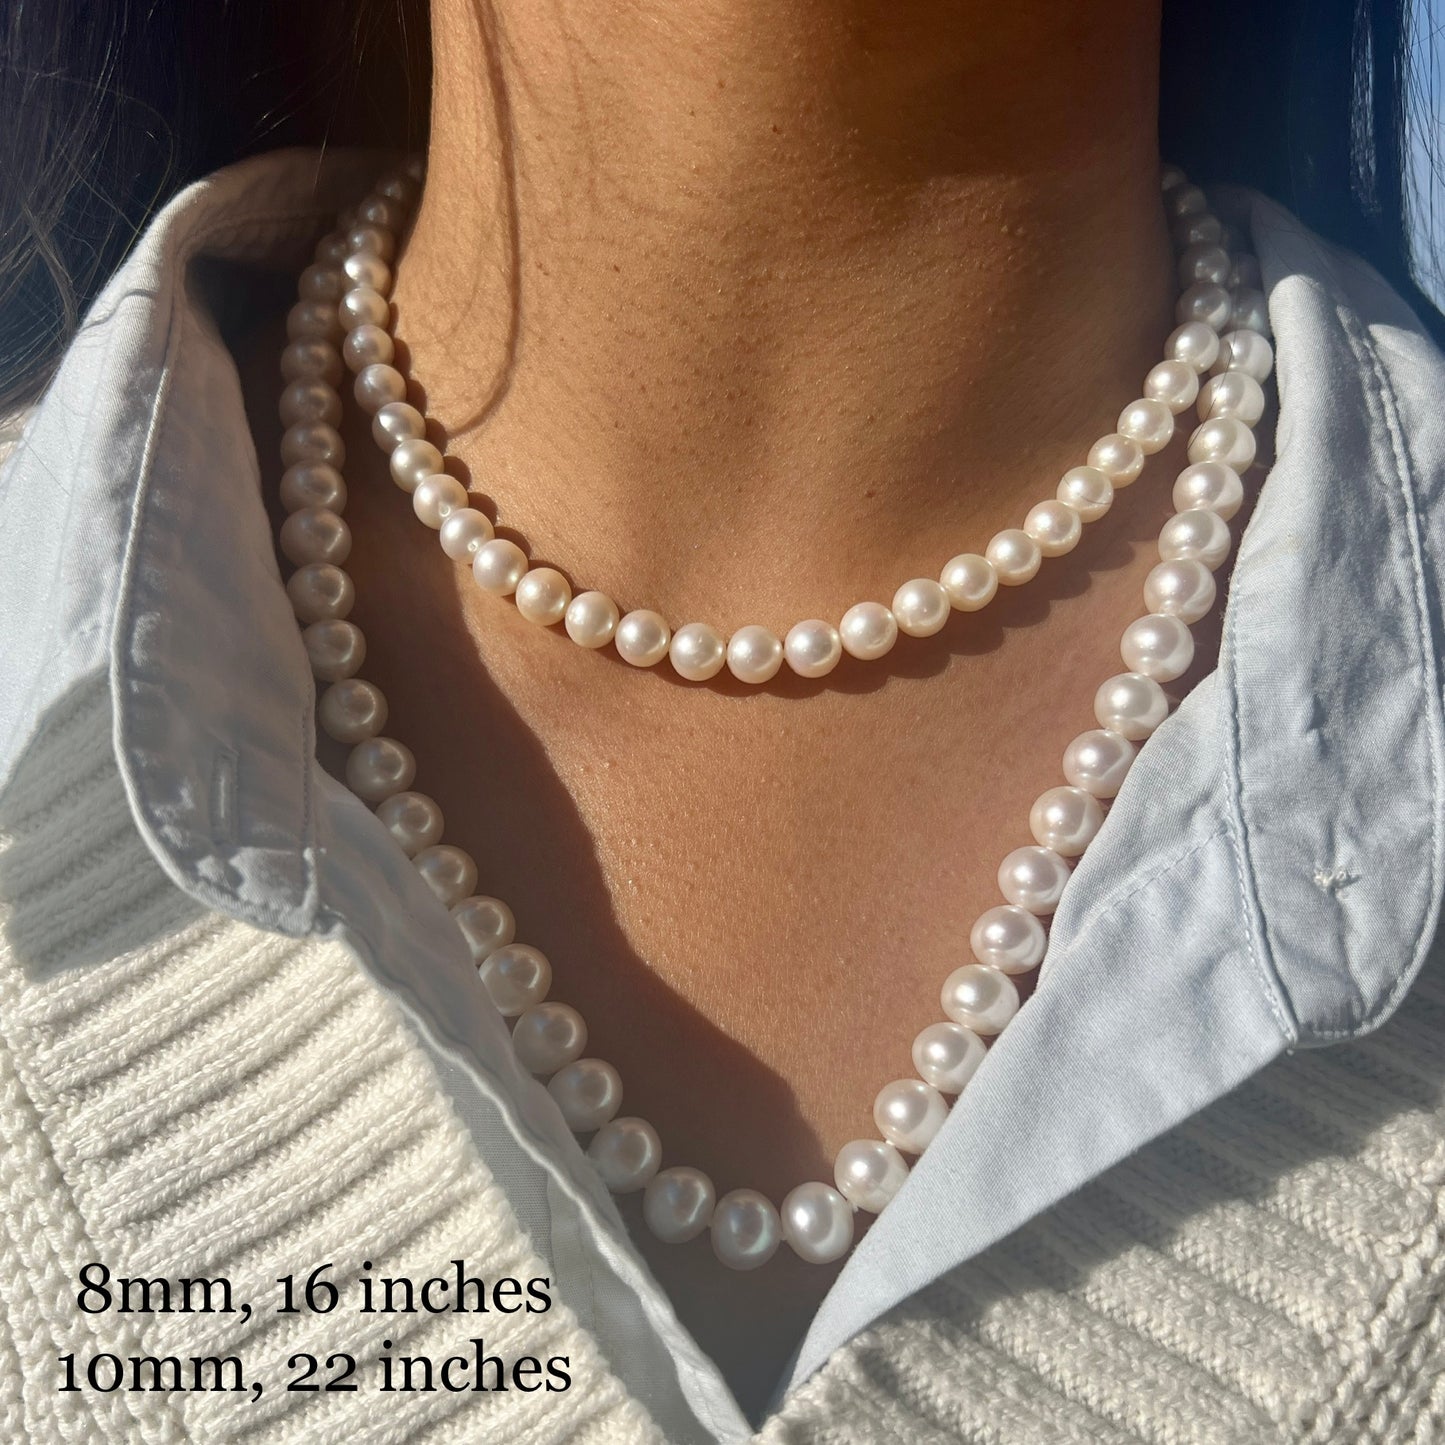 5 Reasons Why You Should Buy Fine Pearl Jewellery – PEARL-LANG®